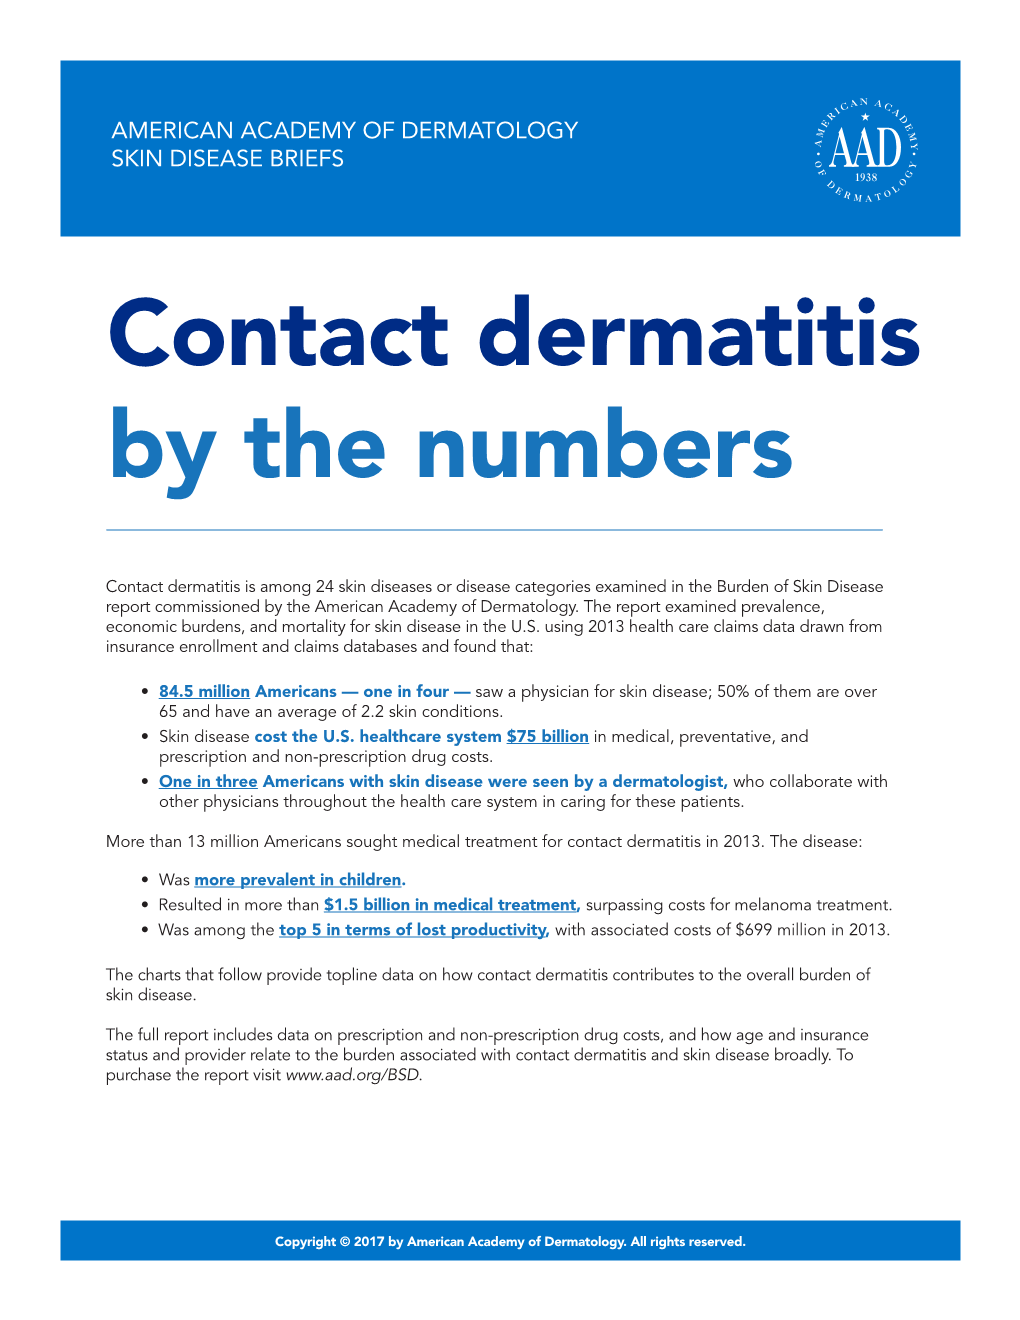 Contact Dermatitis by the Numbers